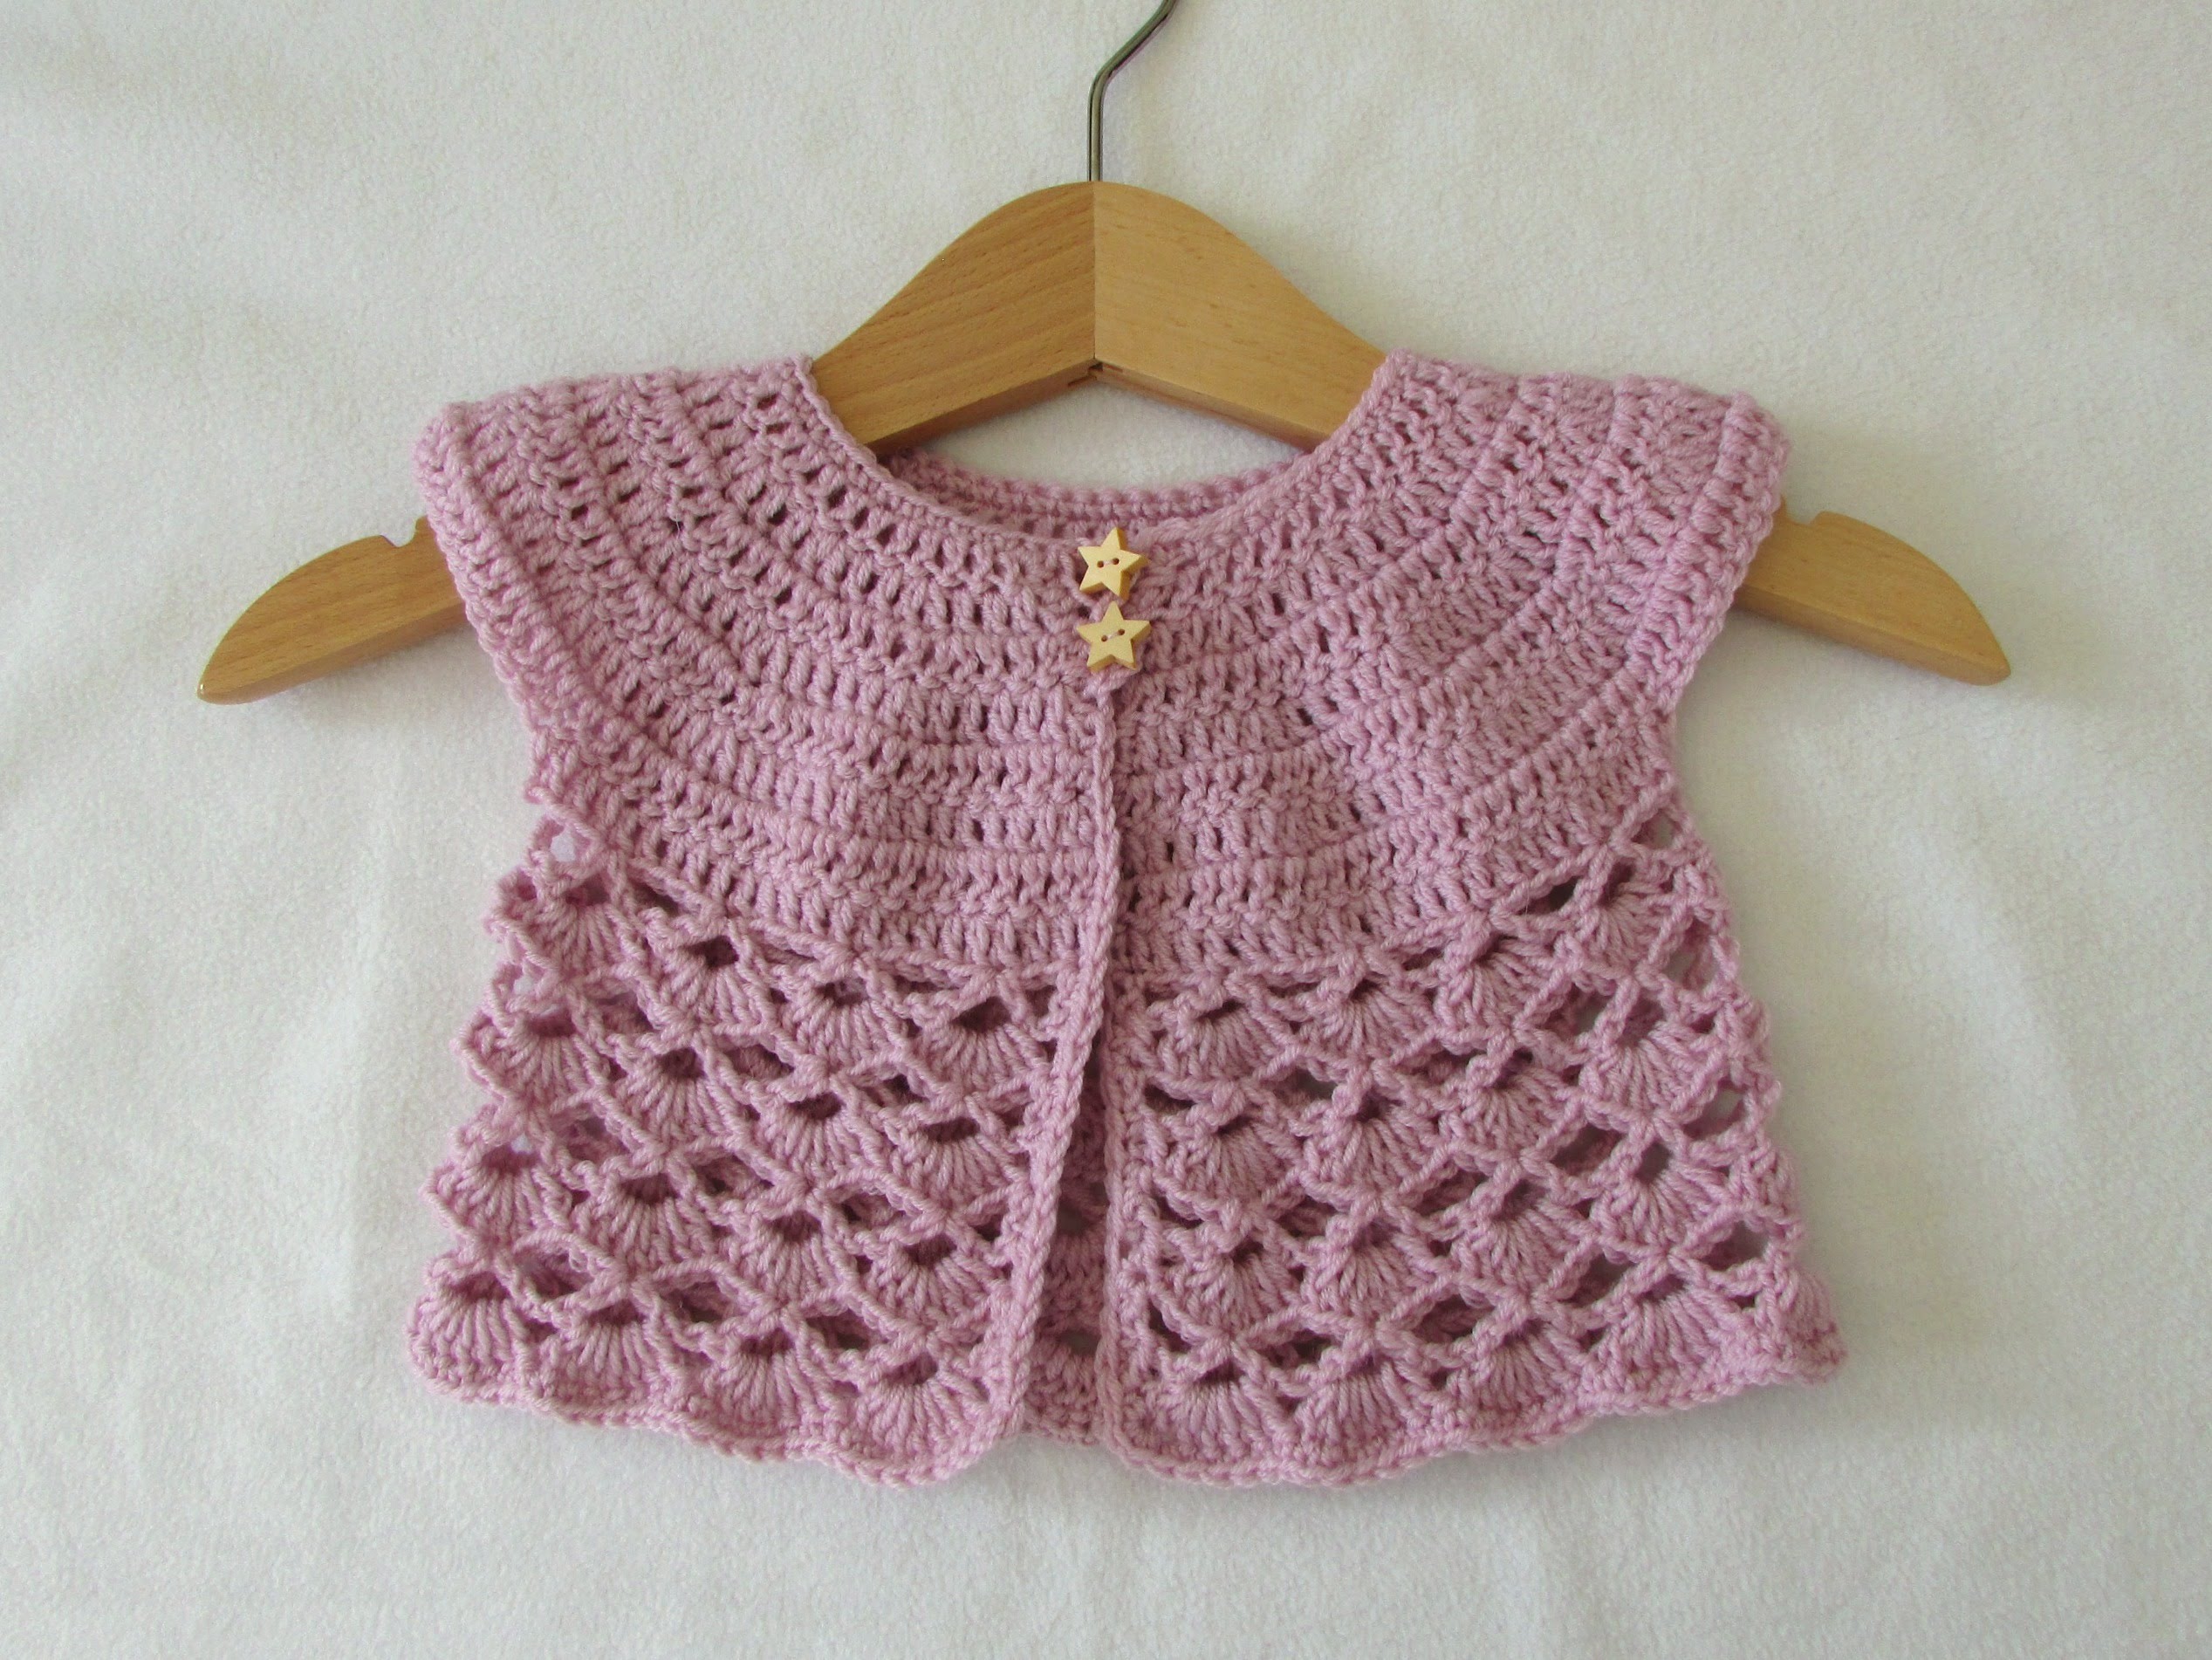 crochet baby sweater how to crochet an easy lace baby cardigan / sweater - youtube NBSQGRU